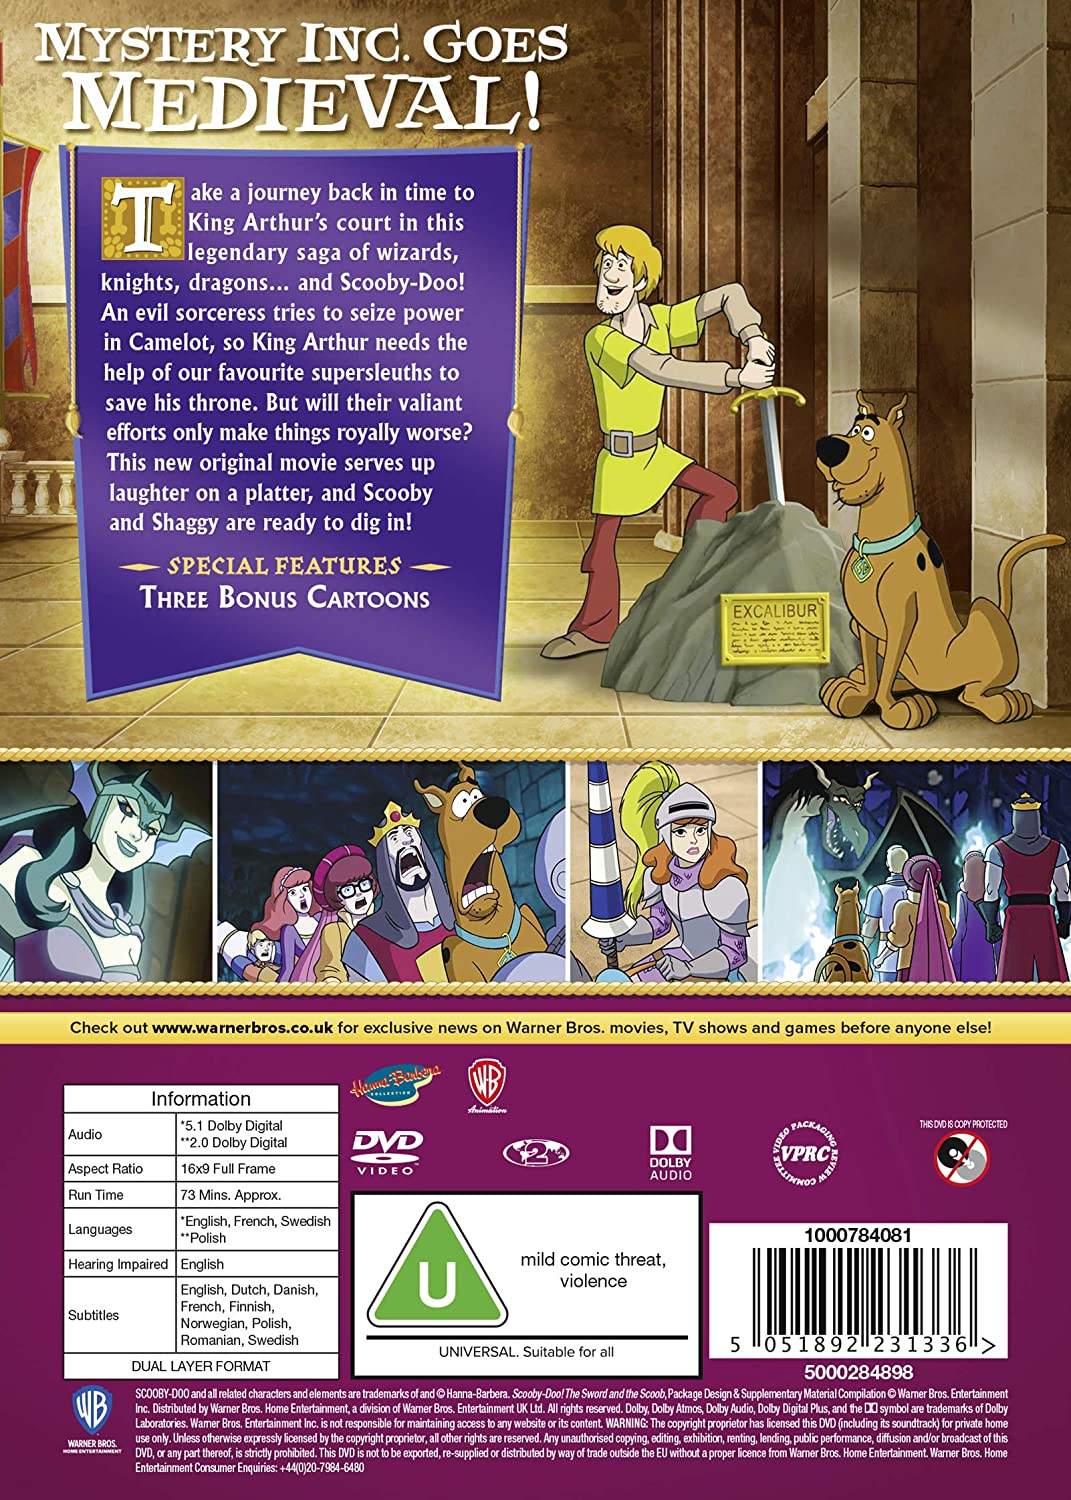 Scooby-Doo: The Sword and The Scoob (DVD)